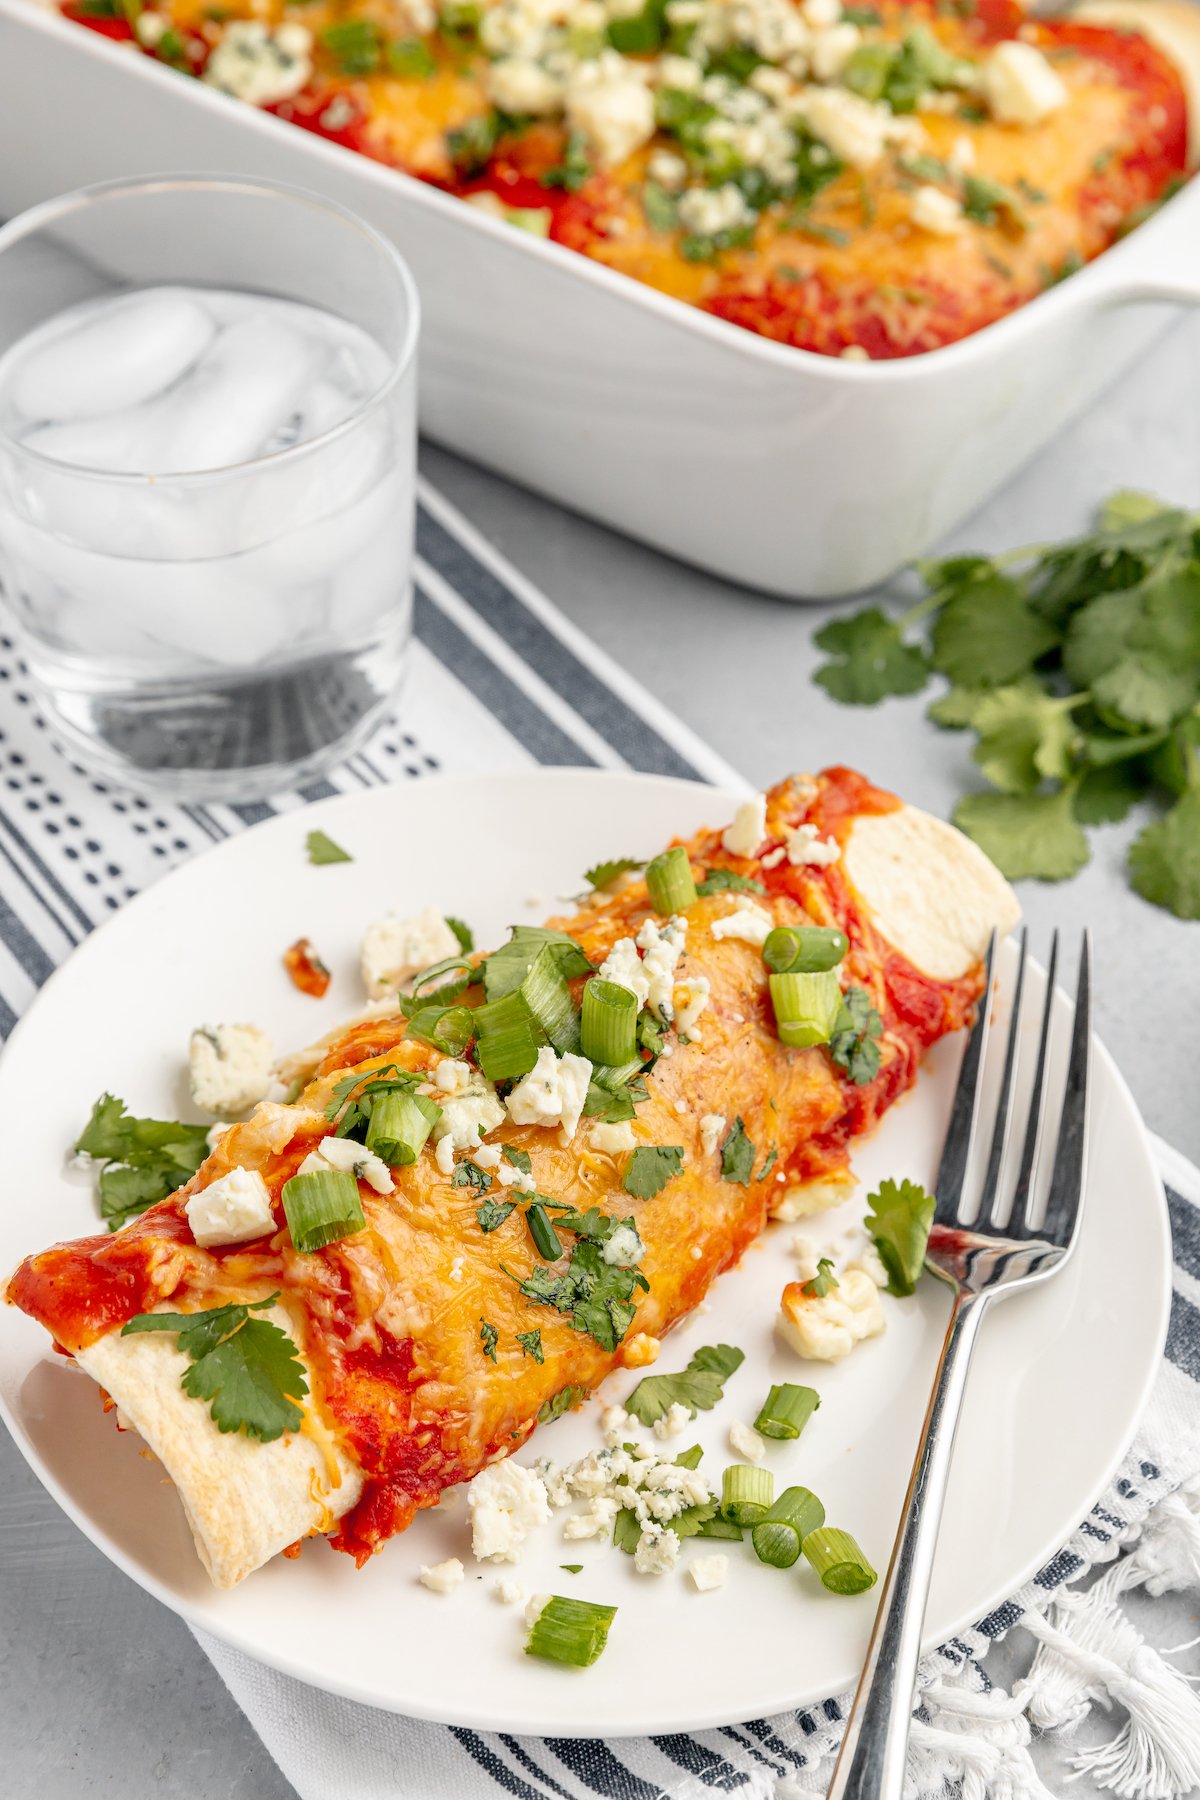 A buffalo chicken enchilada on a small white plate with a fork.